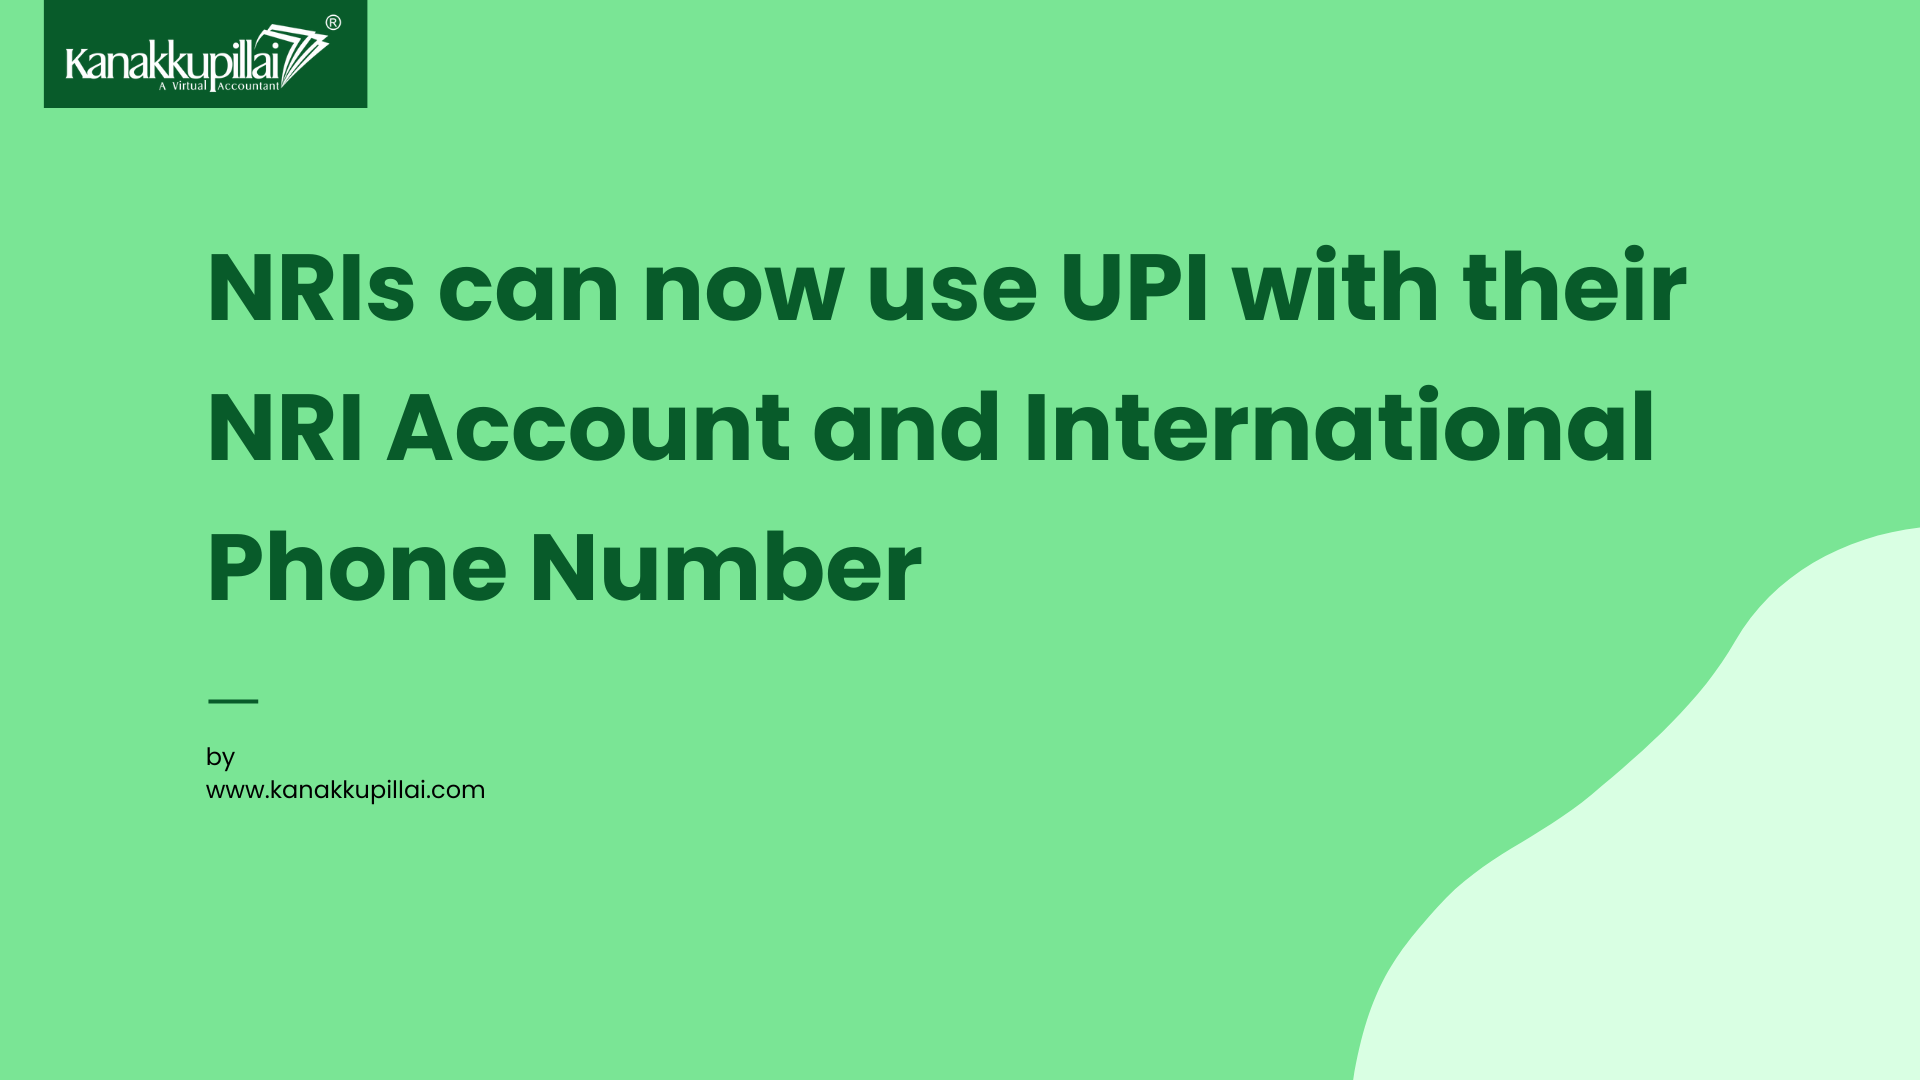 NRIs can now use UPI with their NRI Account and International Phone Number